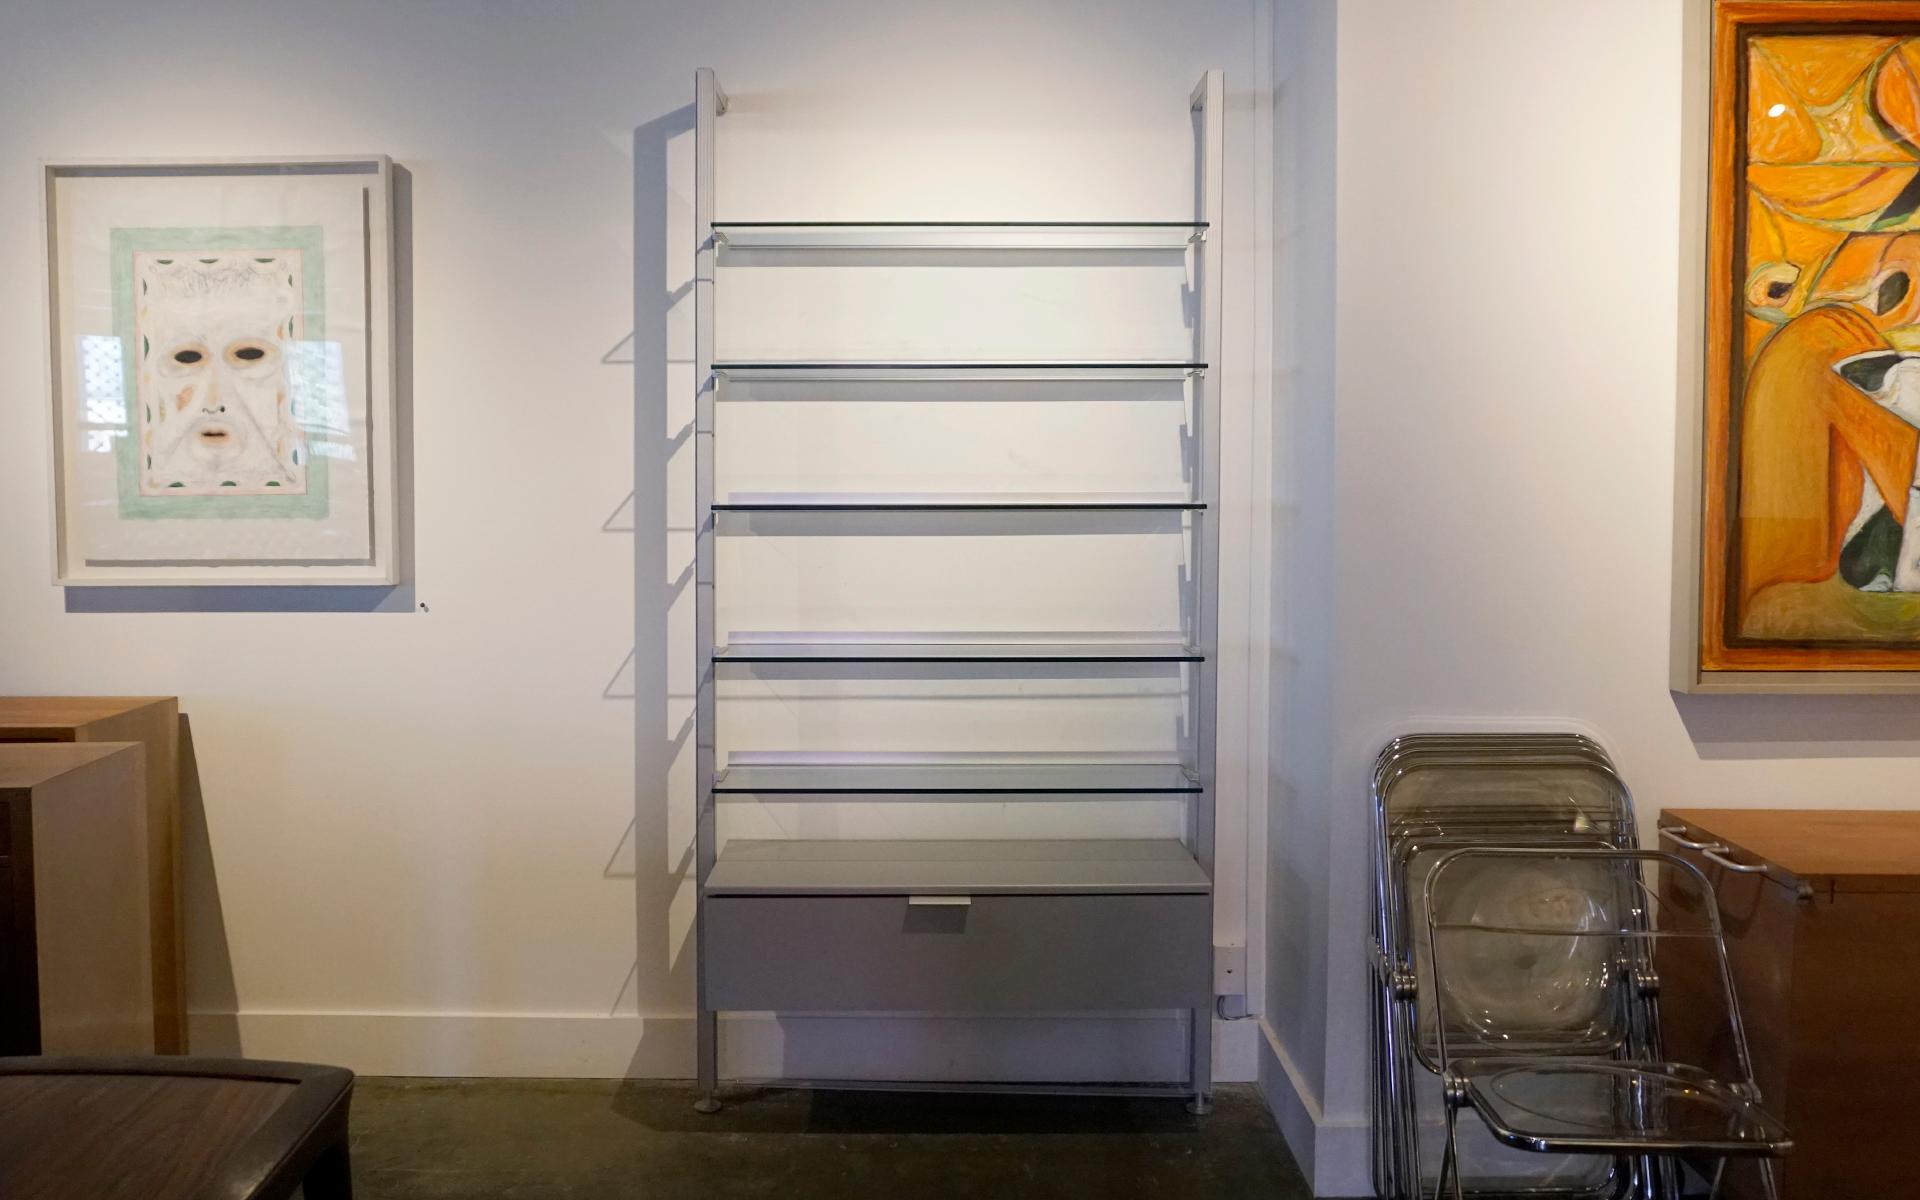 Single Bay wall shelving unit by Calligaris, Italy, 1970s.  Each piece of glass is signed Calligaris Tempered.  Completely original.  The frame / supports are solid brushed aluminum.  The drawers section is silver / gray lacquered wood.  The glass